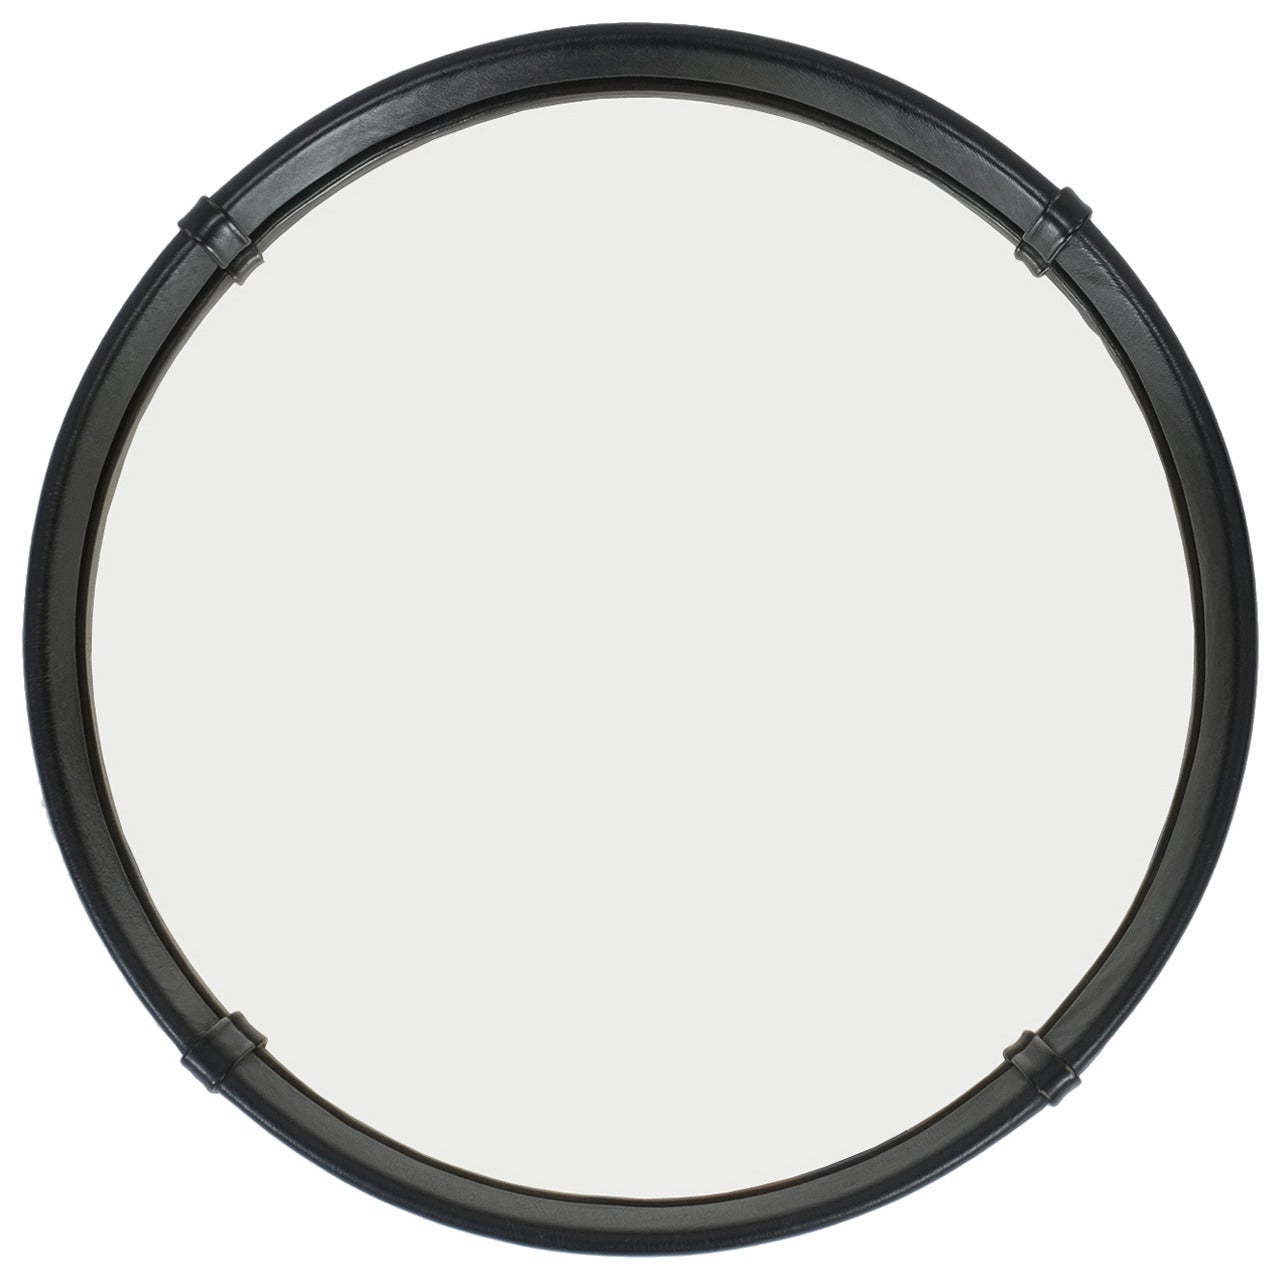 Circular Leather Wrapped Mirror by Pace